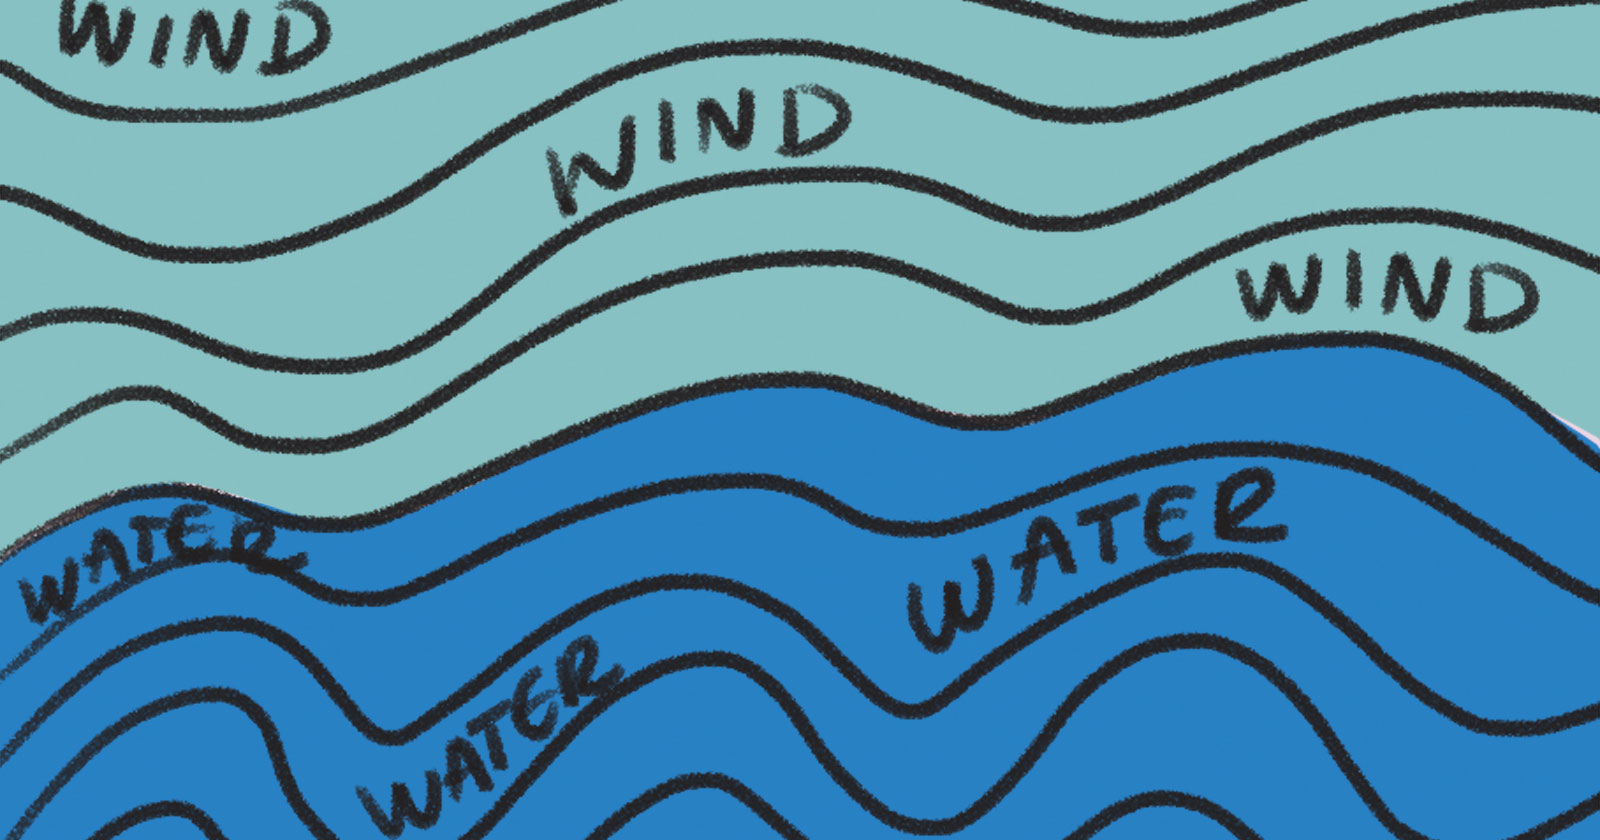 Illustration of Wind and Water